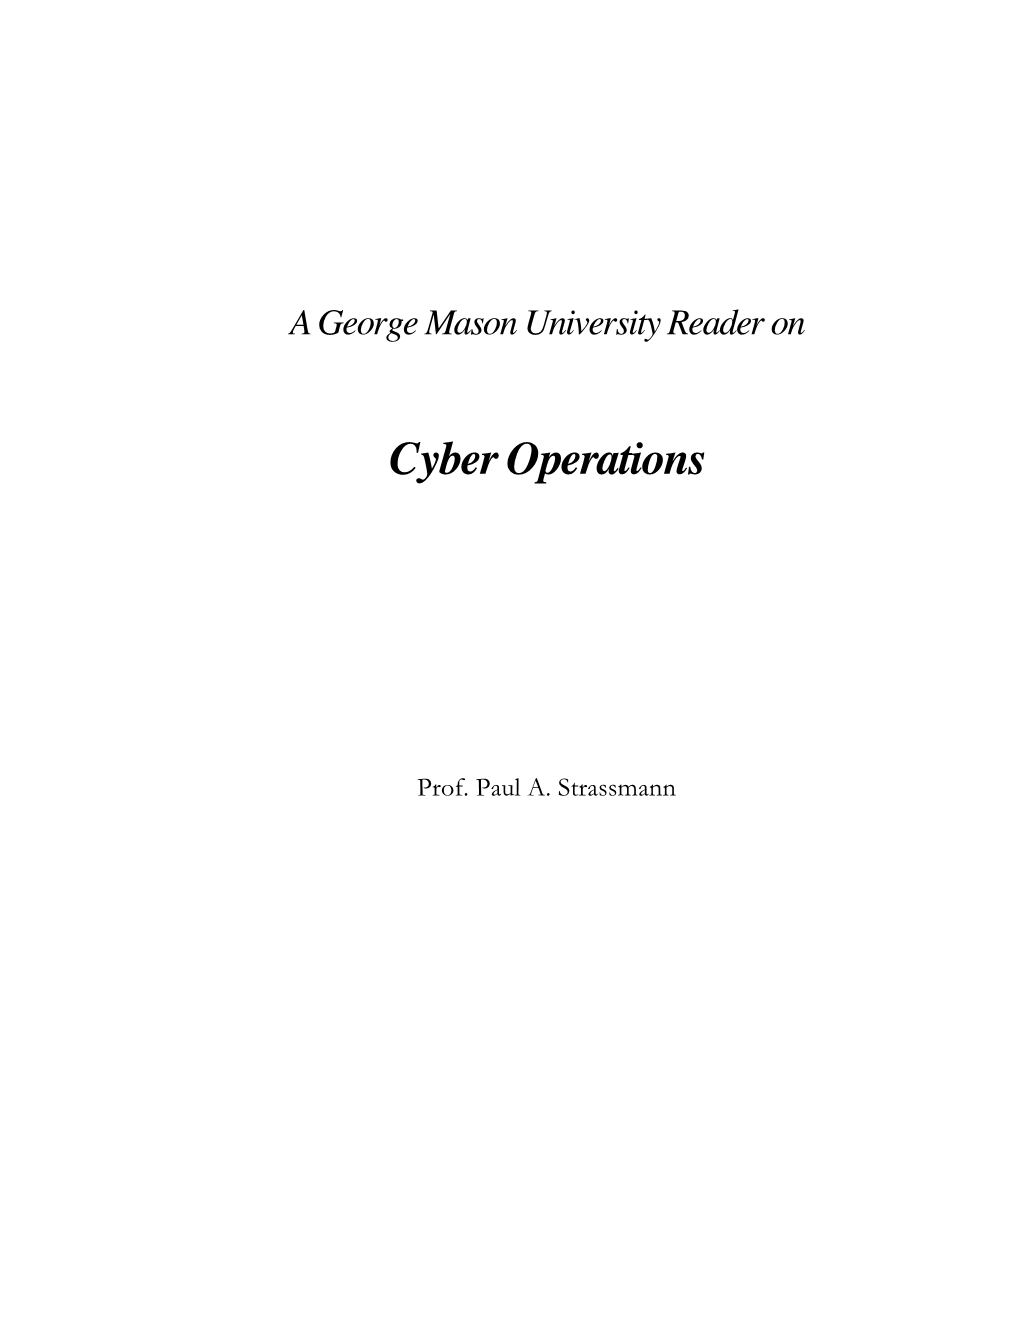 Reader on Cyber Operations